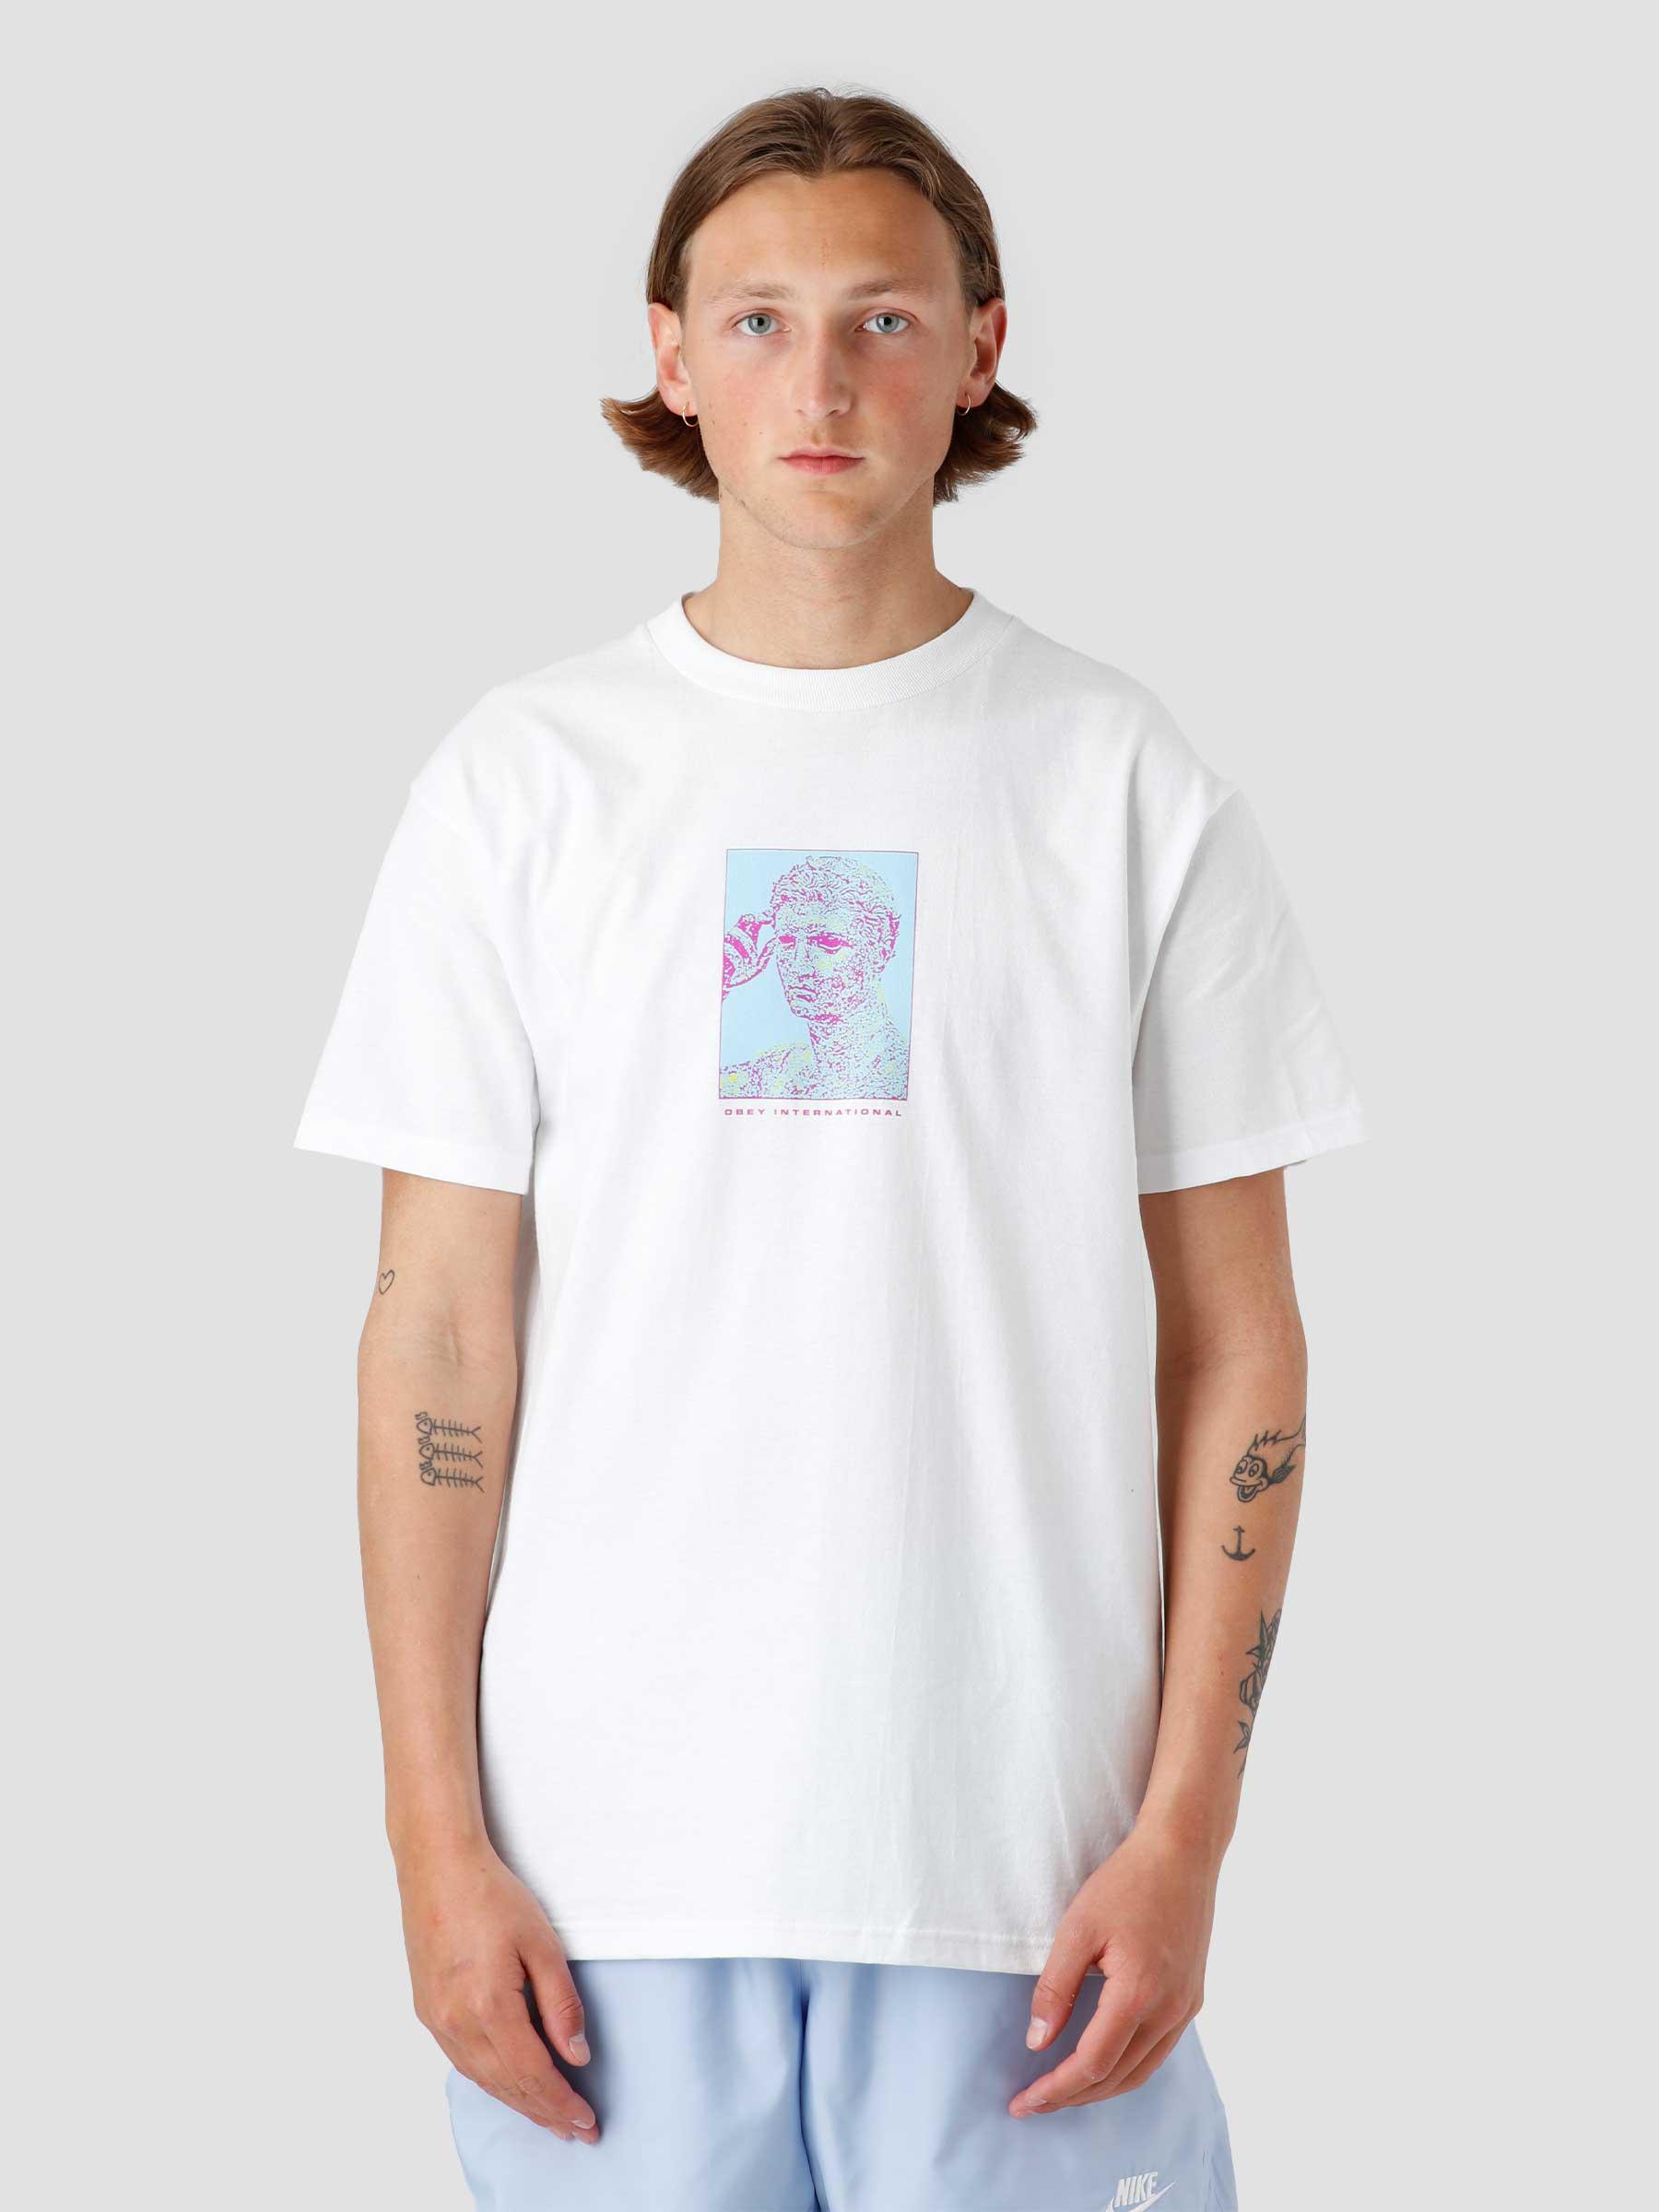 Thinking Of Obey T-shirt White 165263034